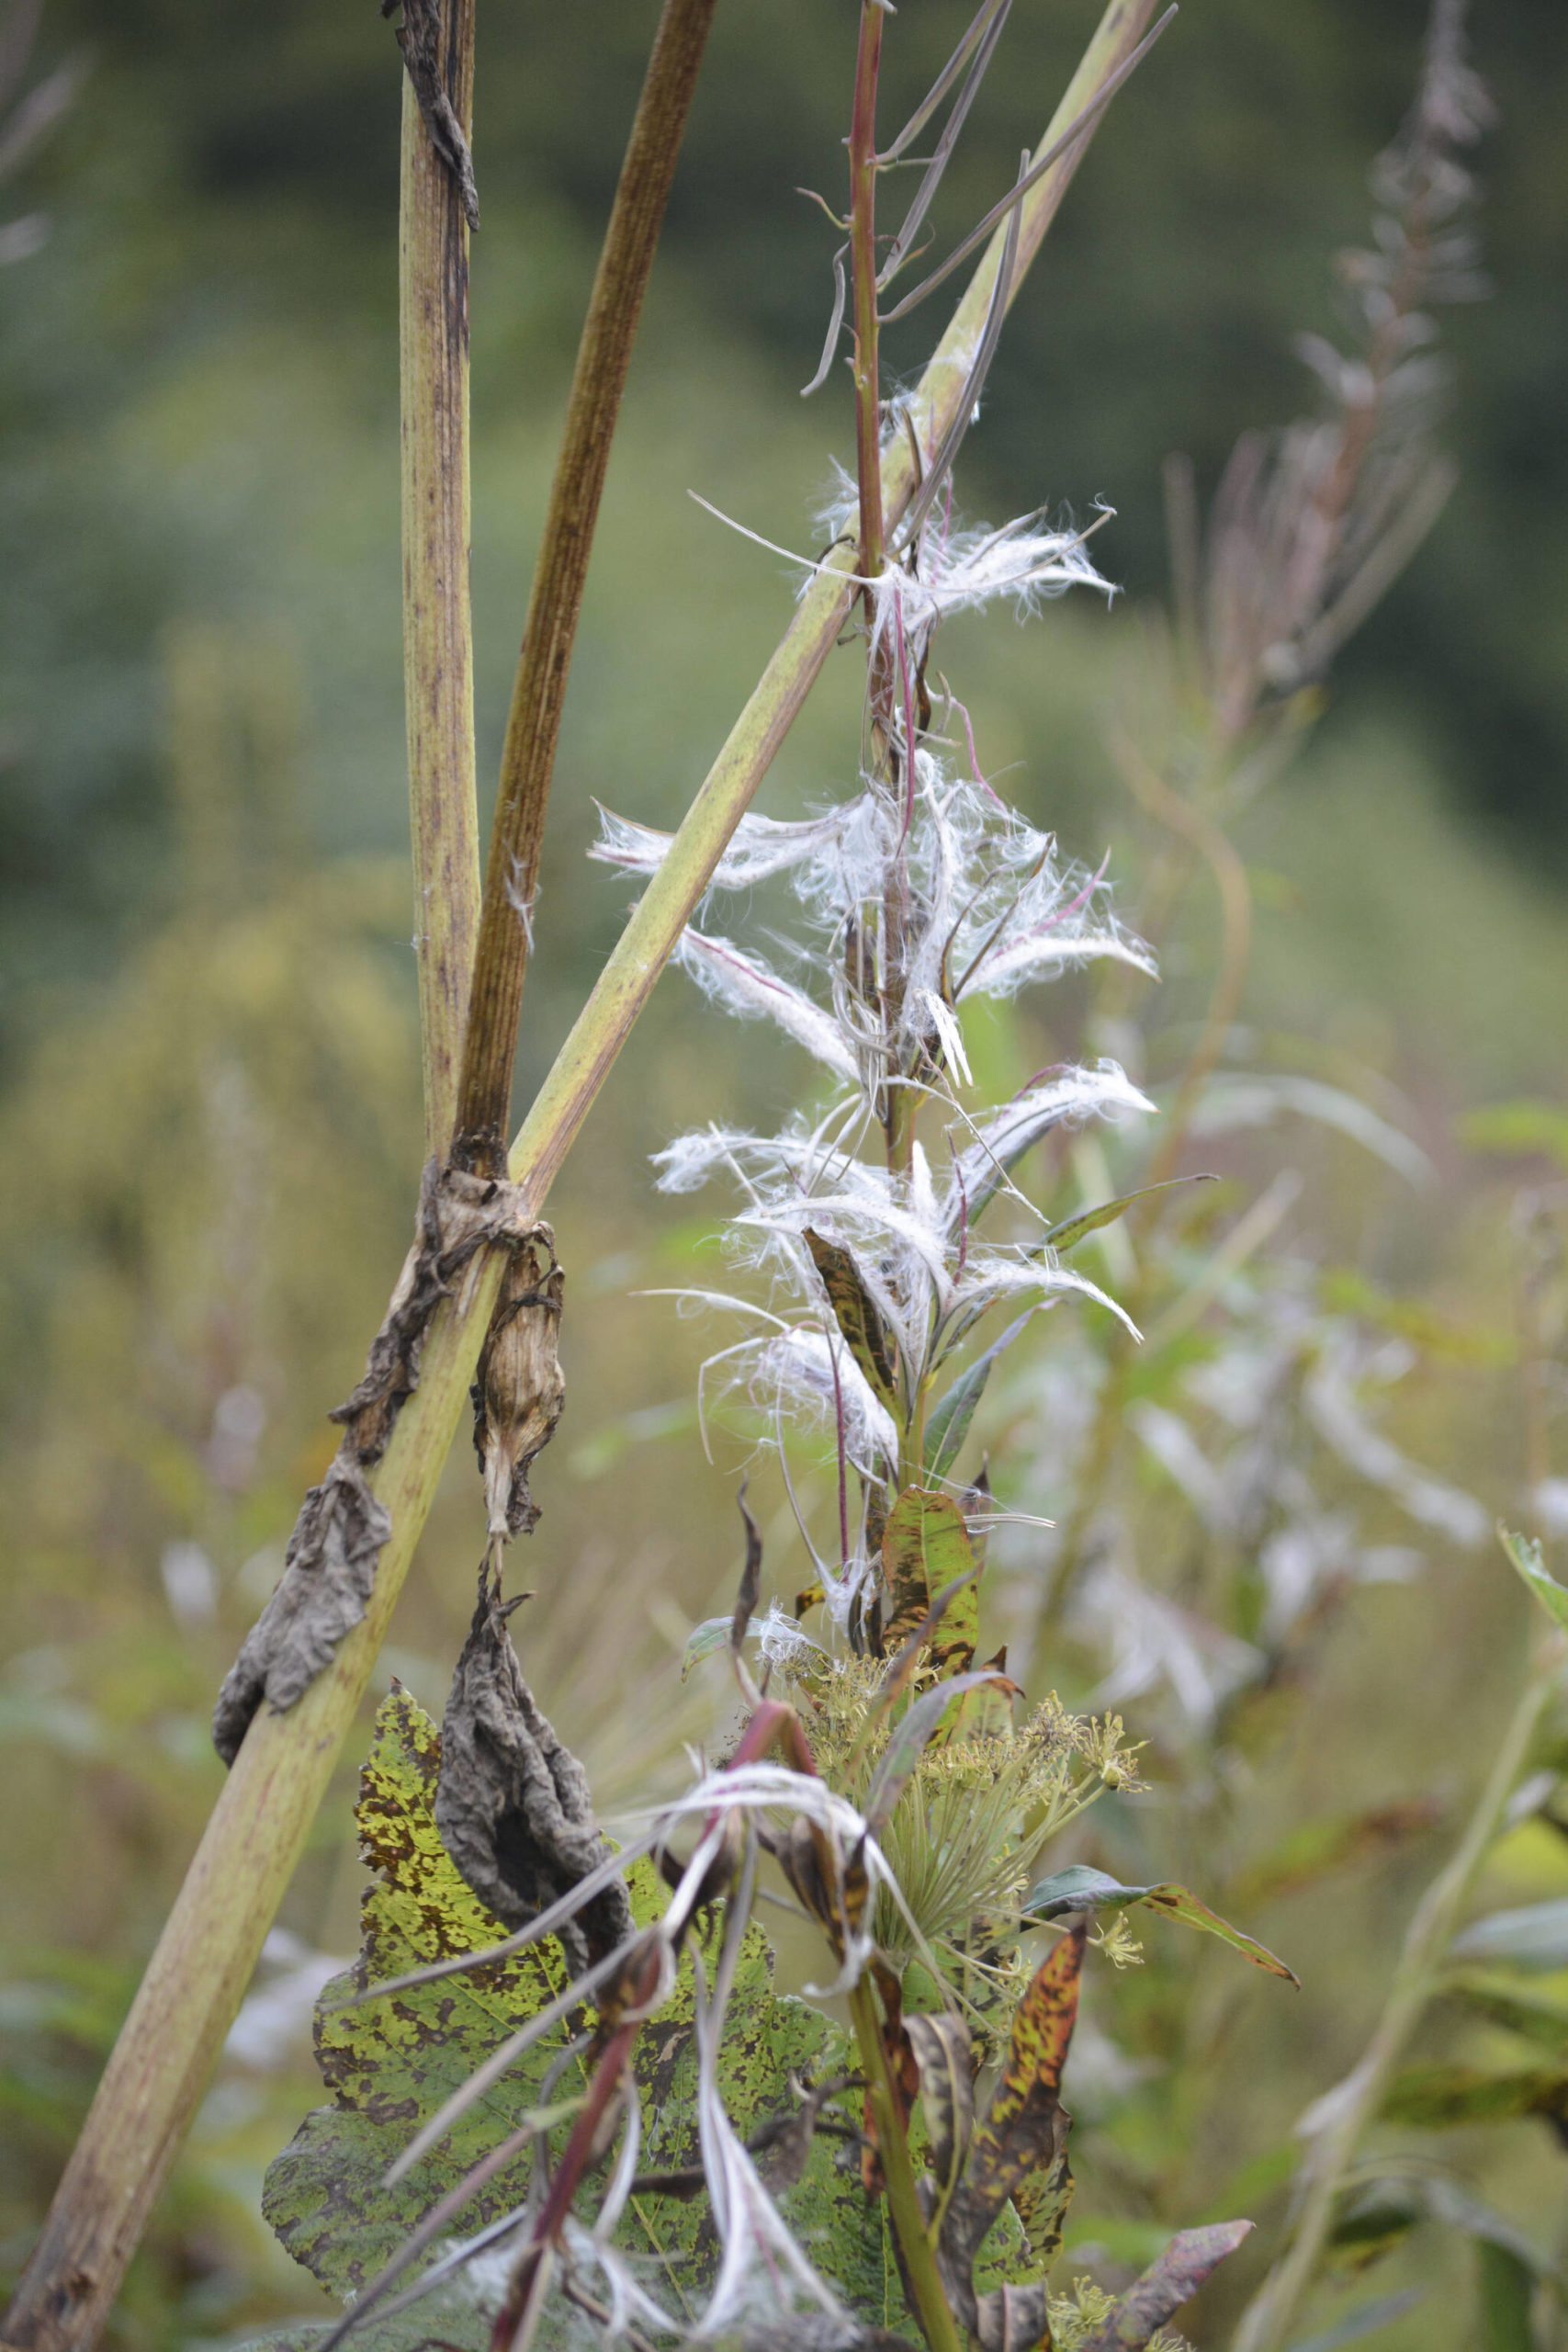 Fireweed has gone to fluff as seen on Friday, Sept. 2, 2022, at the Lookout Mountain Trails near Homer, Alaska. (Photo by Michael Armstrong/Homer News)